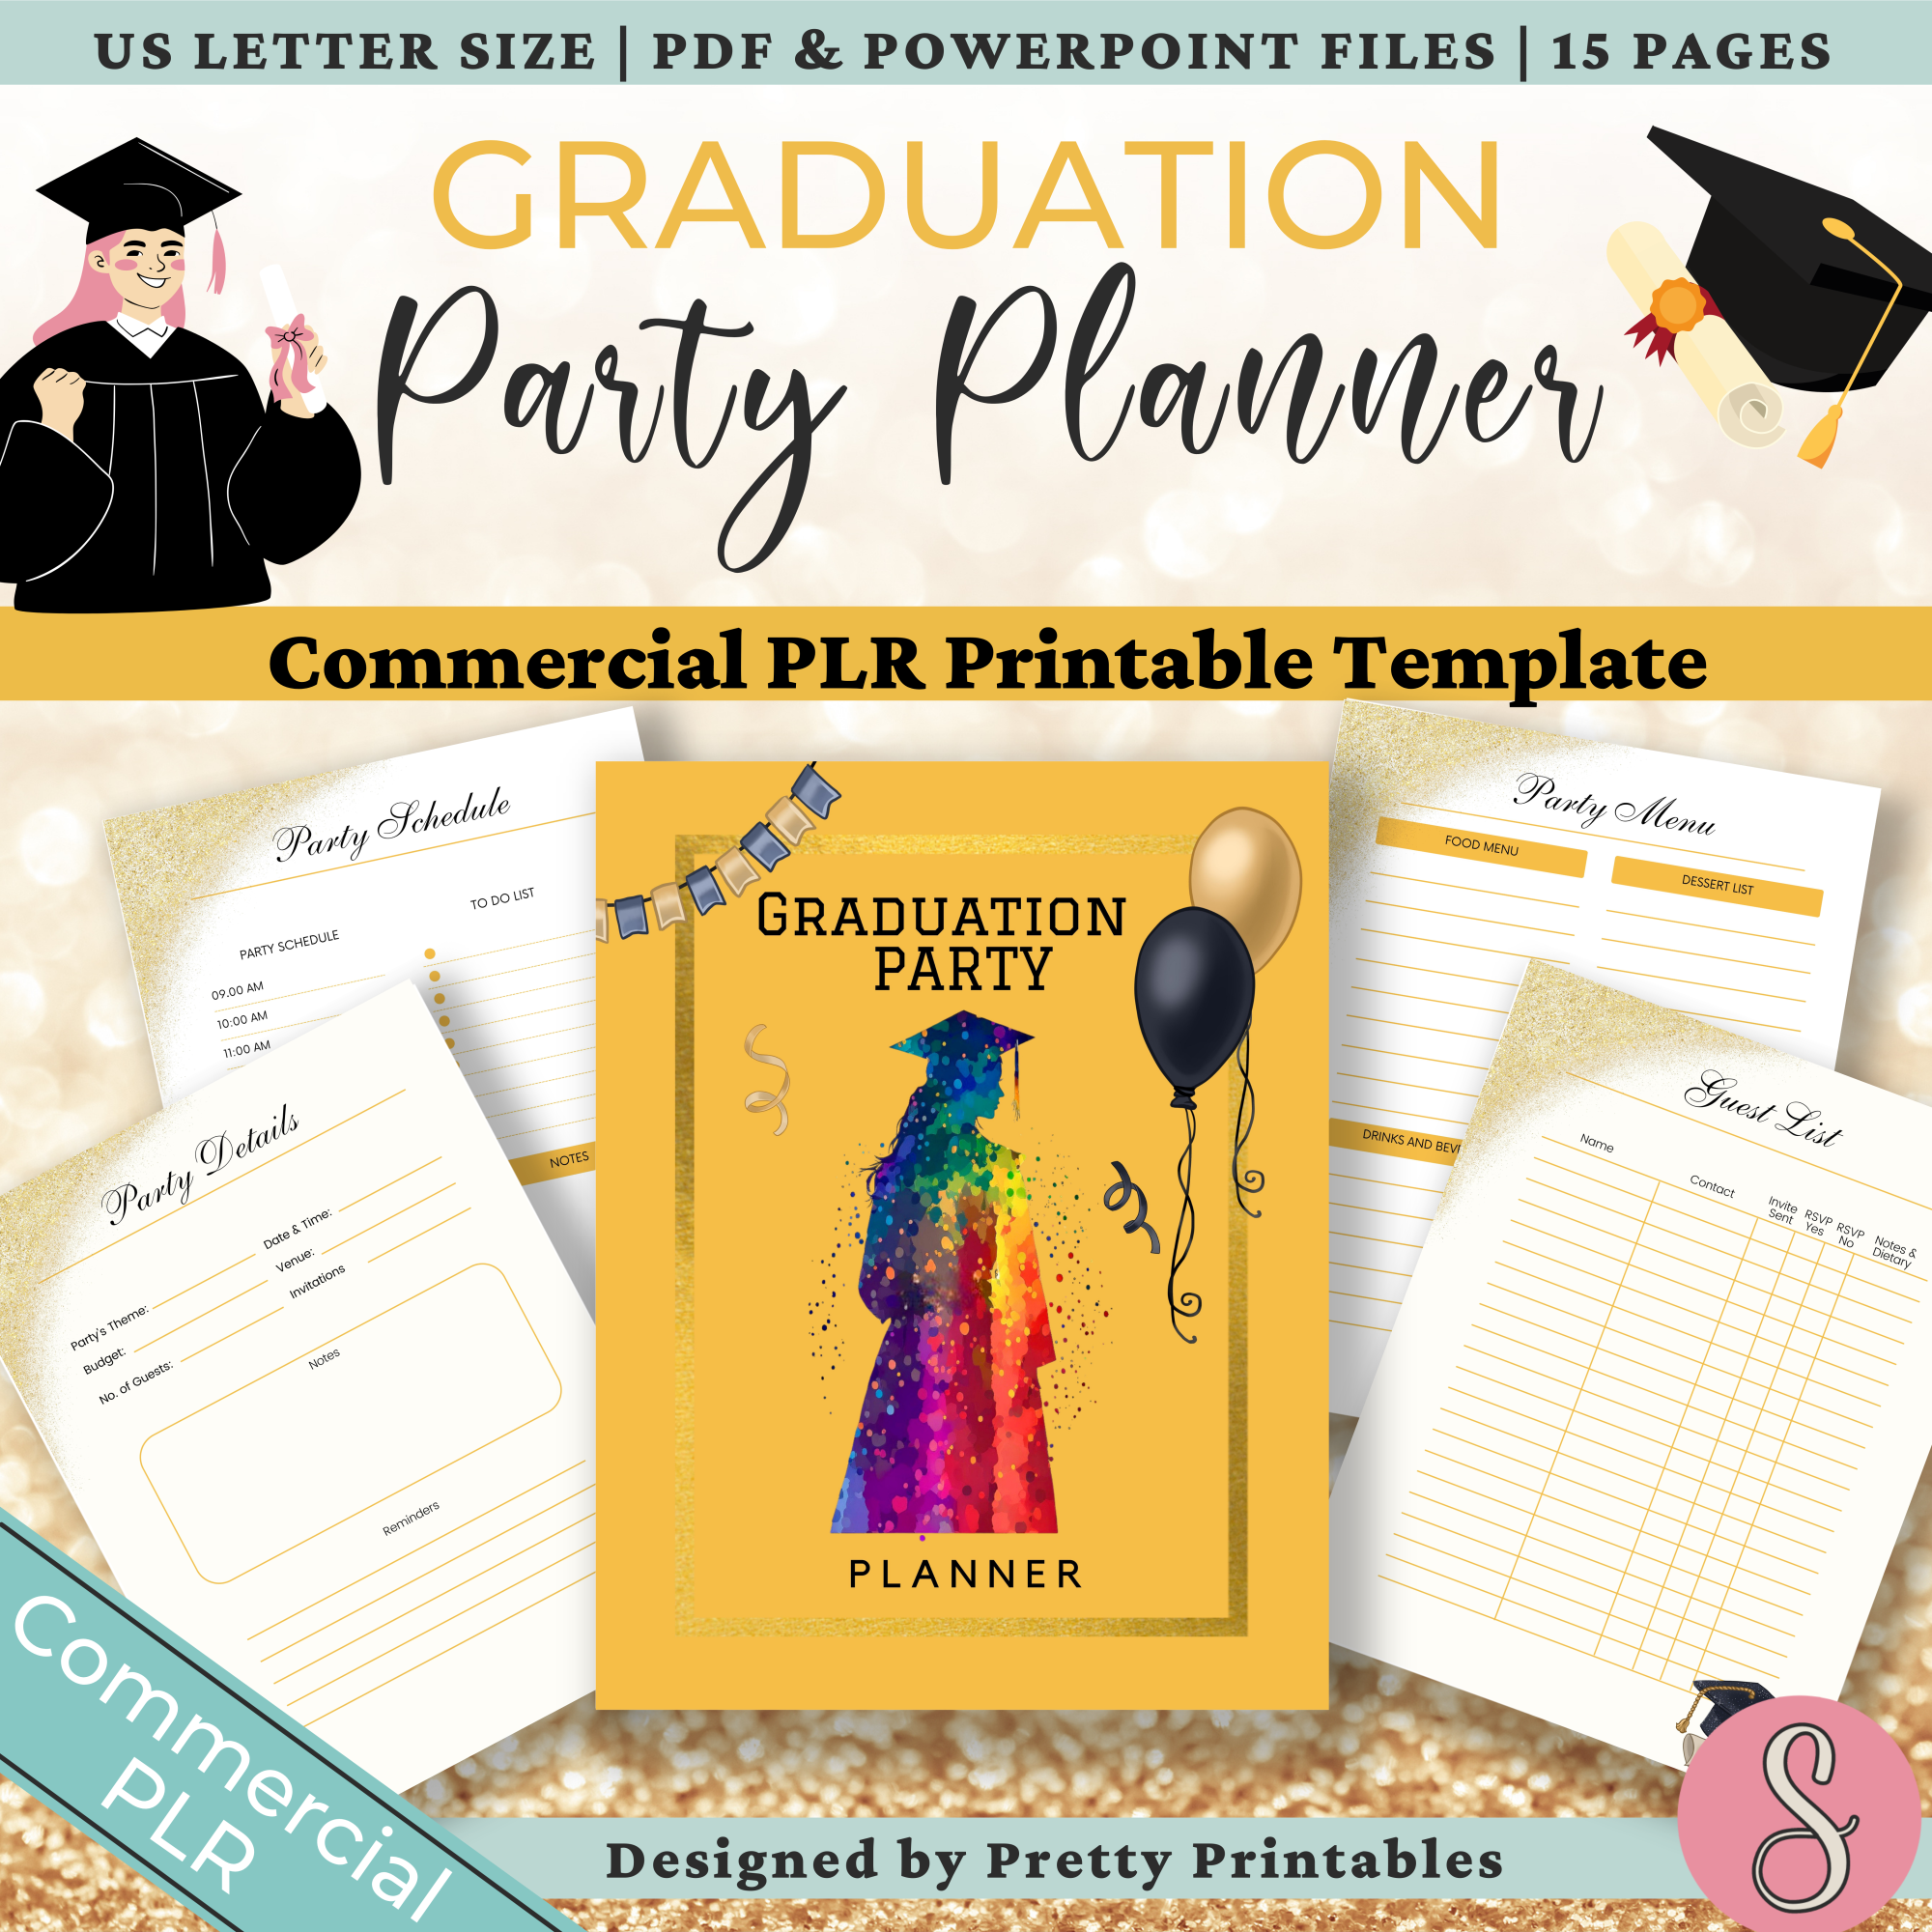 From Caps to Confetti: The Complete Graduation Party Planner